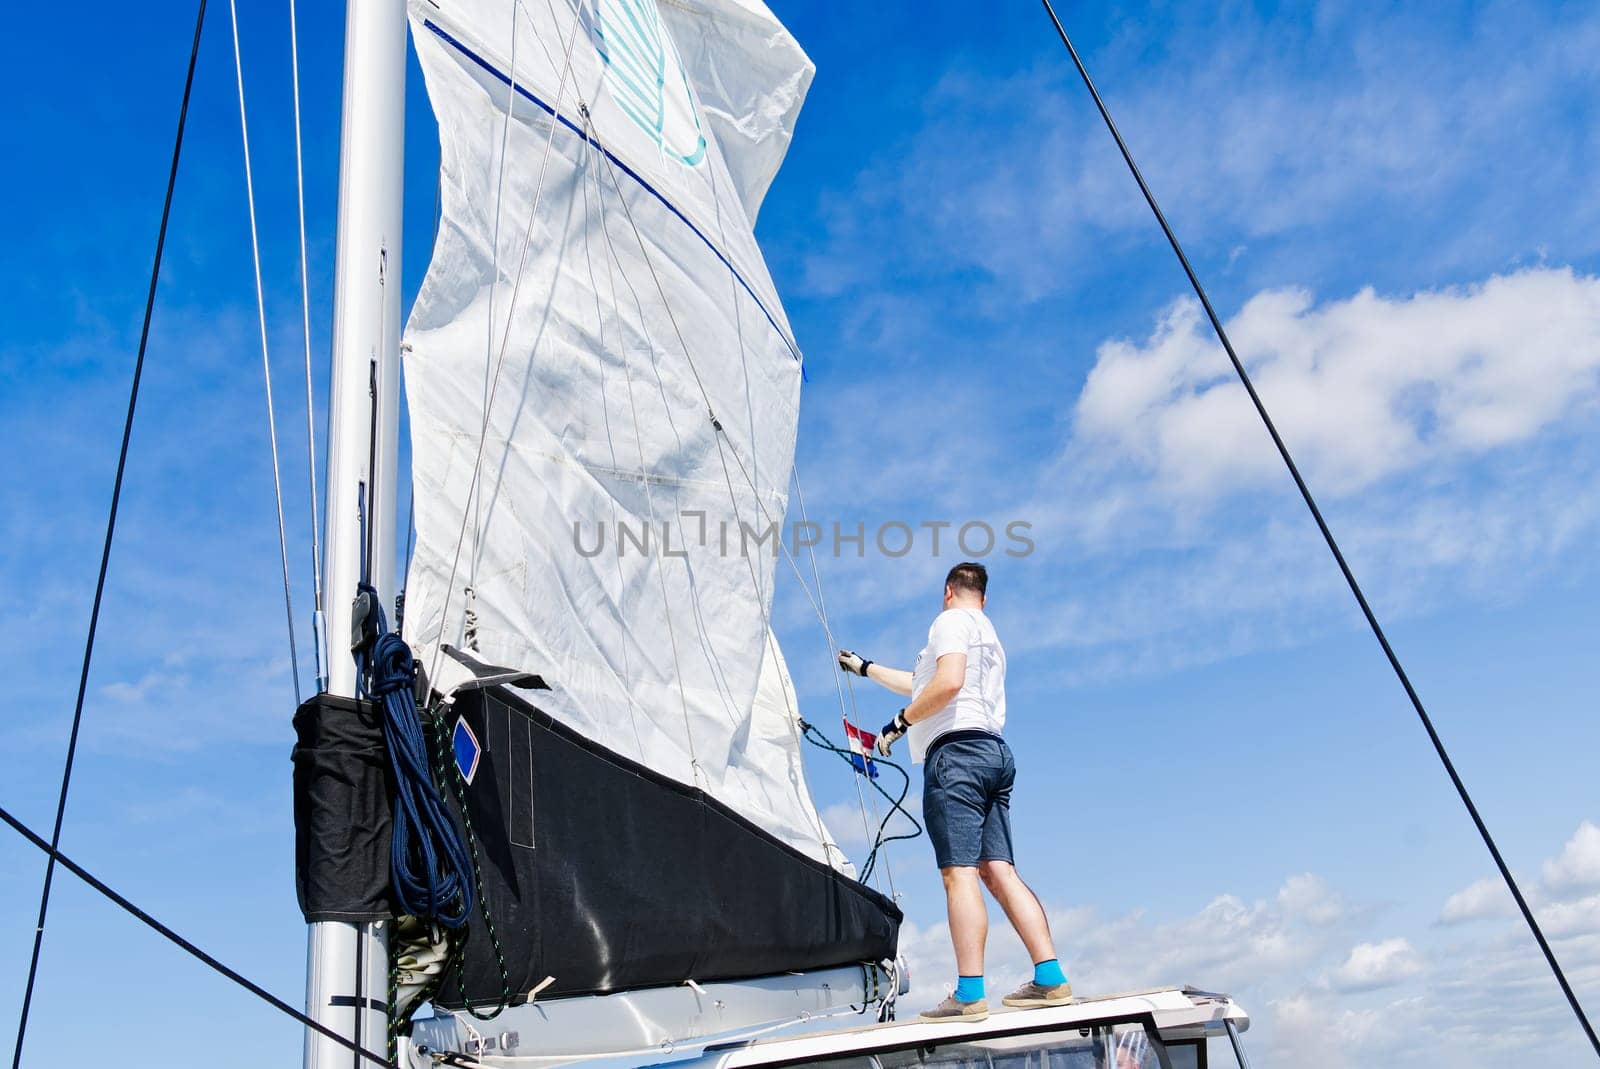 Raising the sail on a yacht. Young man captan lifting the sail of catamaran yacht during cruising. luxury sailing yacht, with sails being raised by rigging